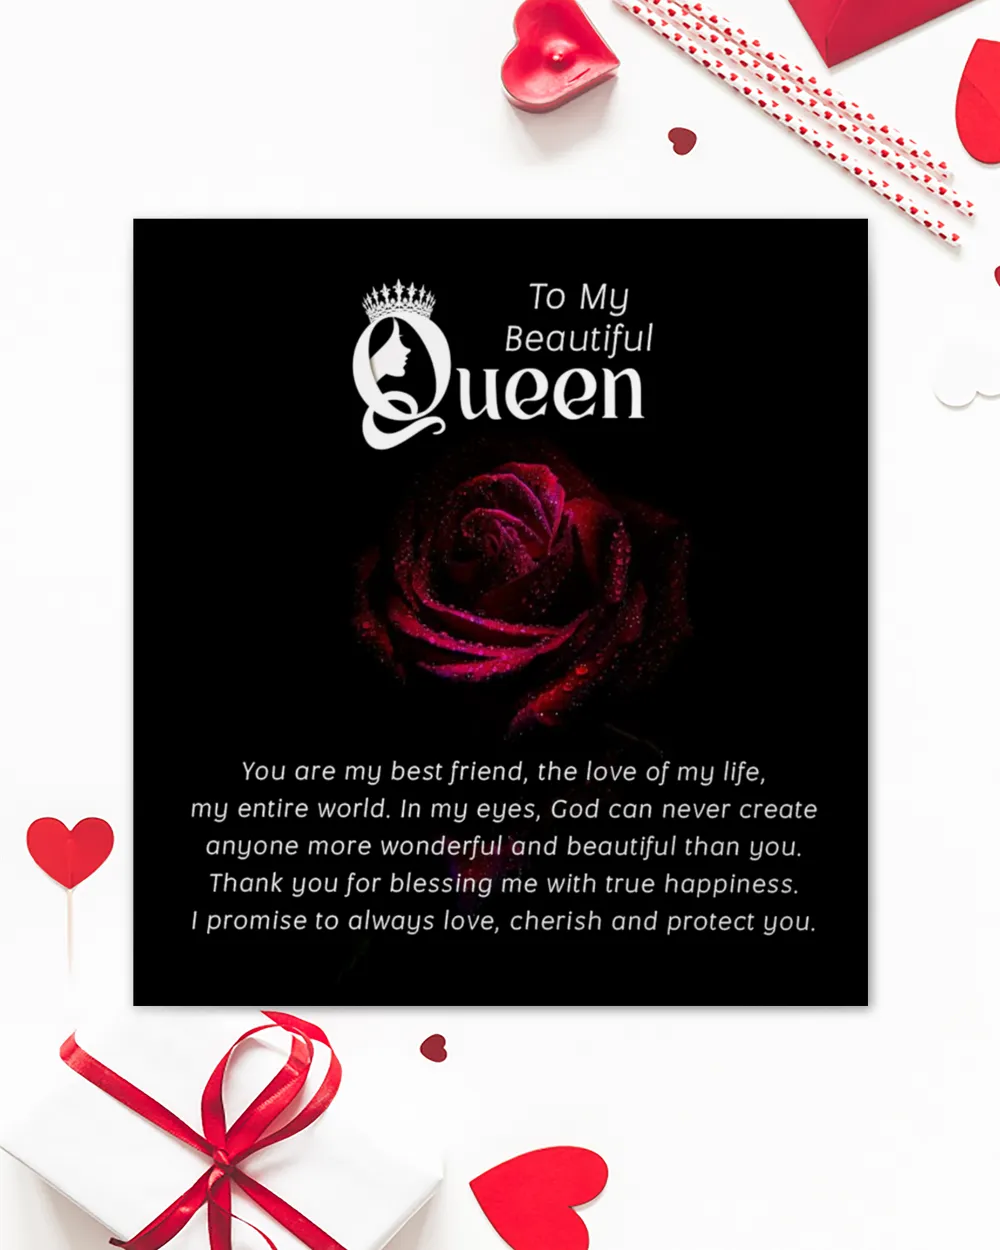 To my beautiful queen-You are my best friend